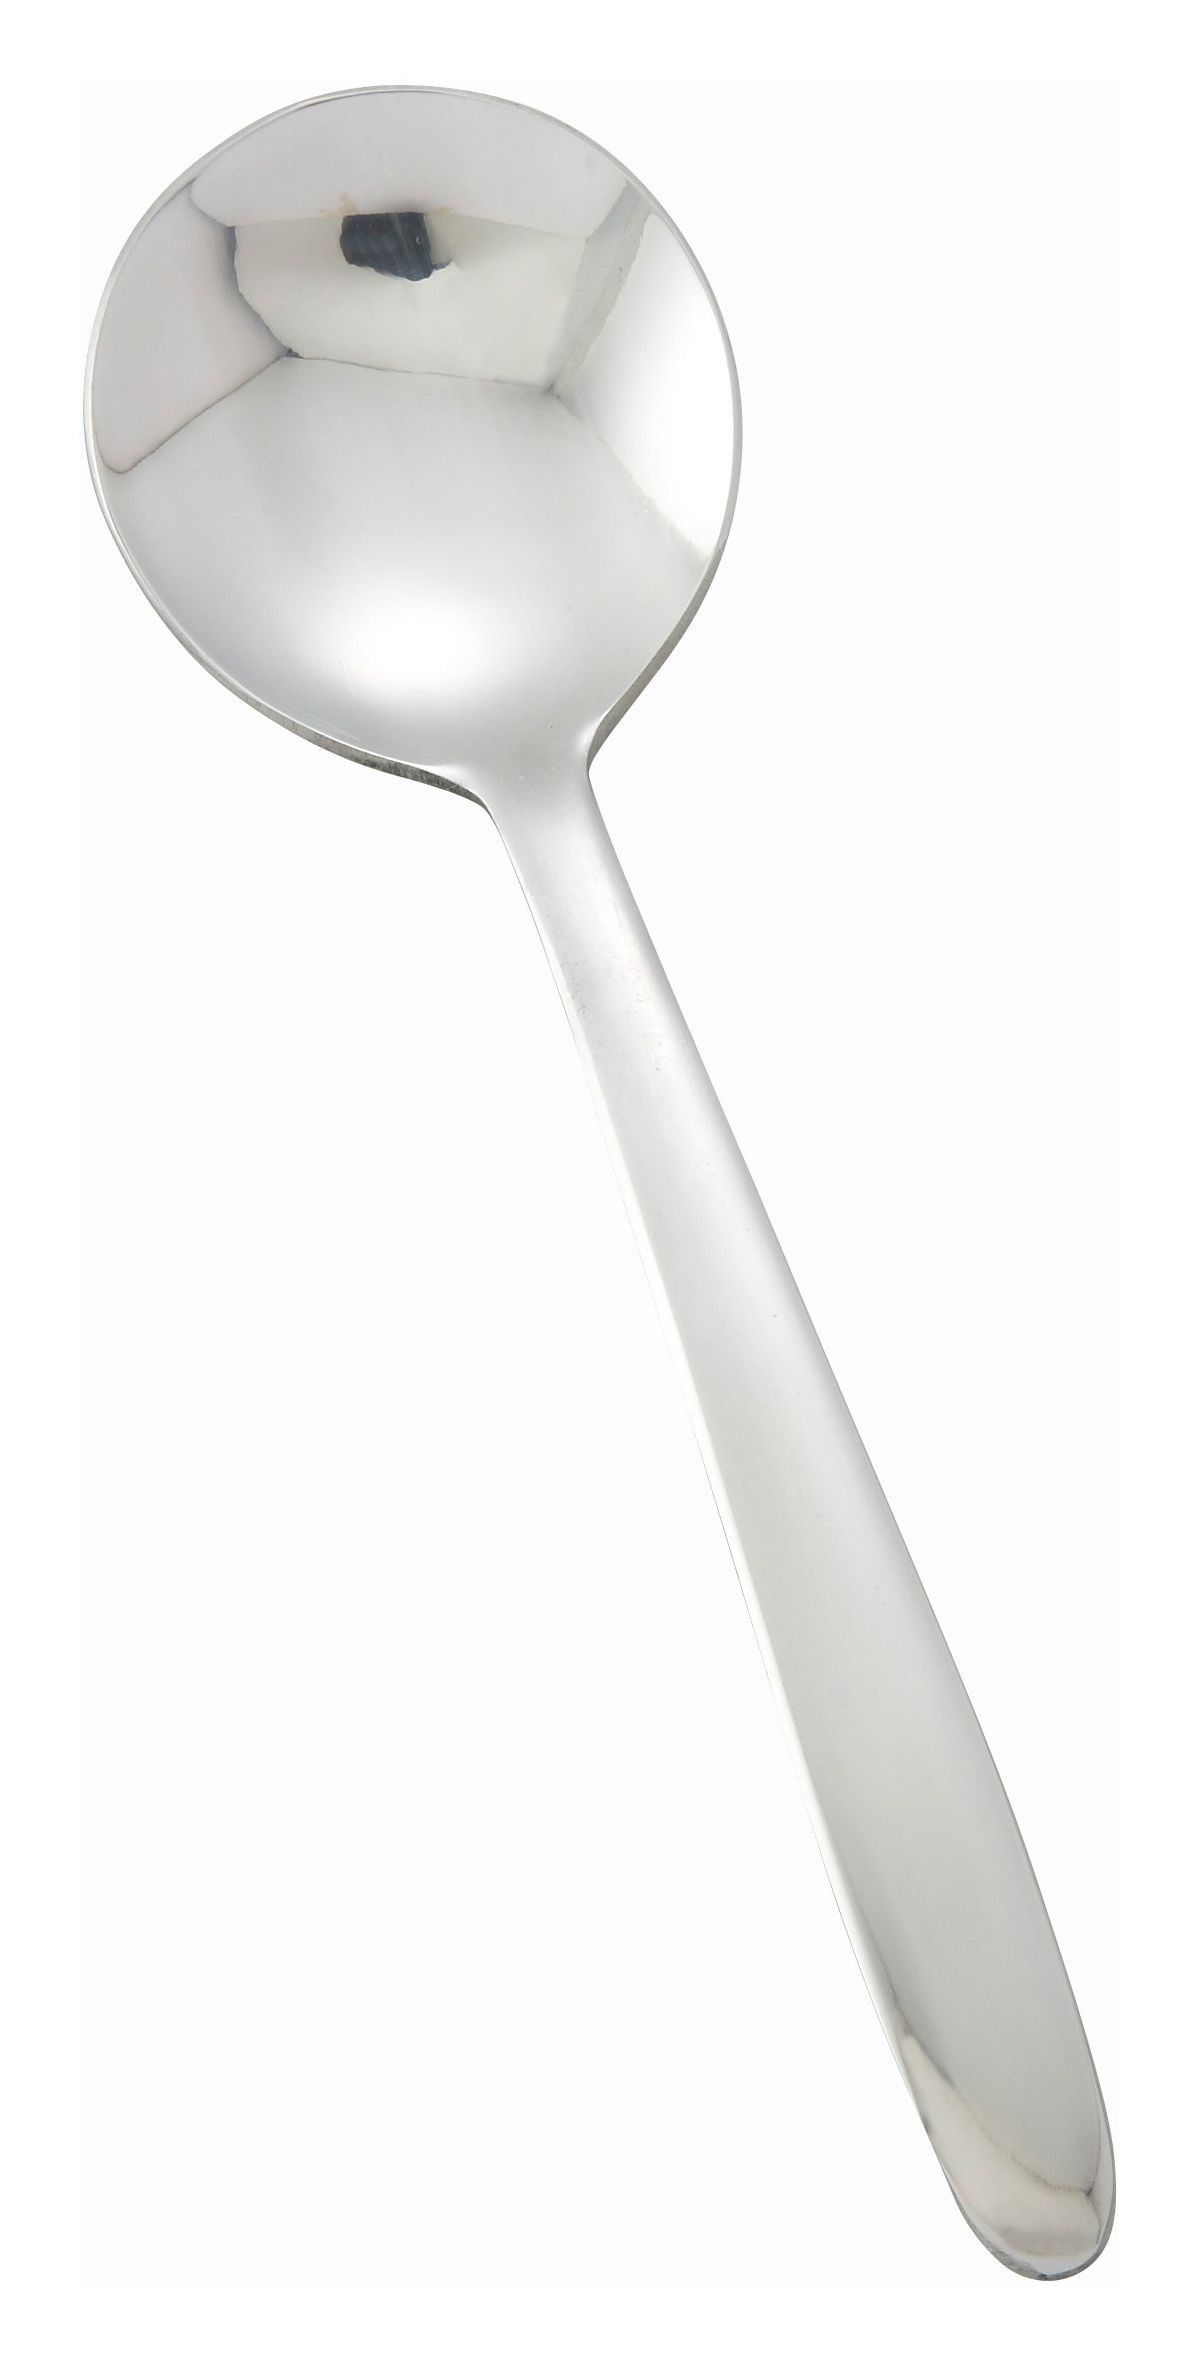 Winco 0019-04 Flute Heavy Weight Mirror Finish Stainless Steel Bouillon Spoon (12/Pack)